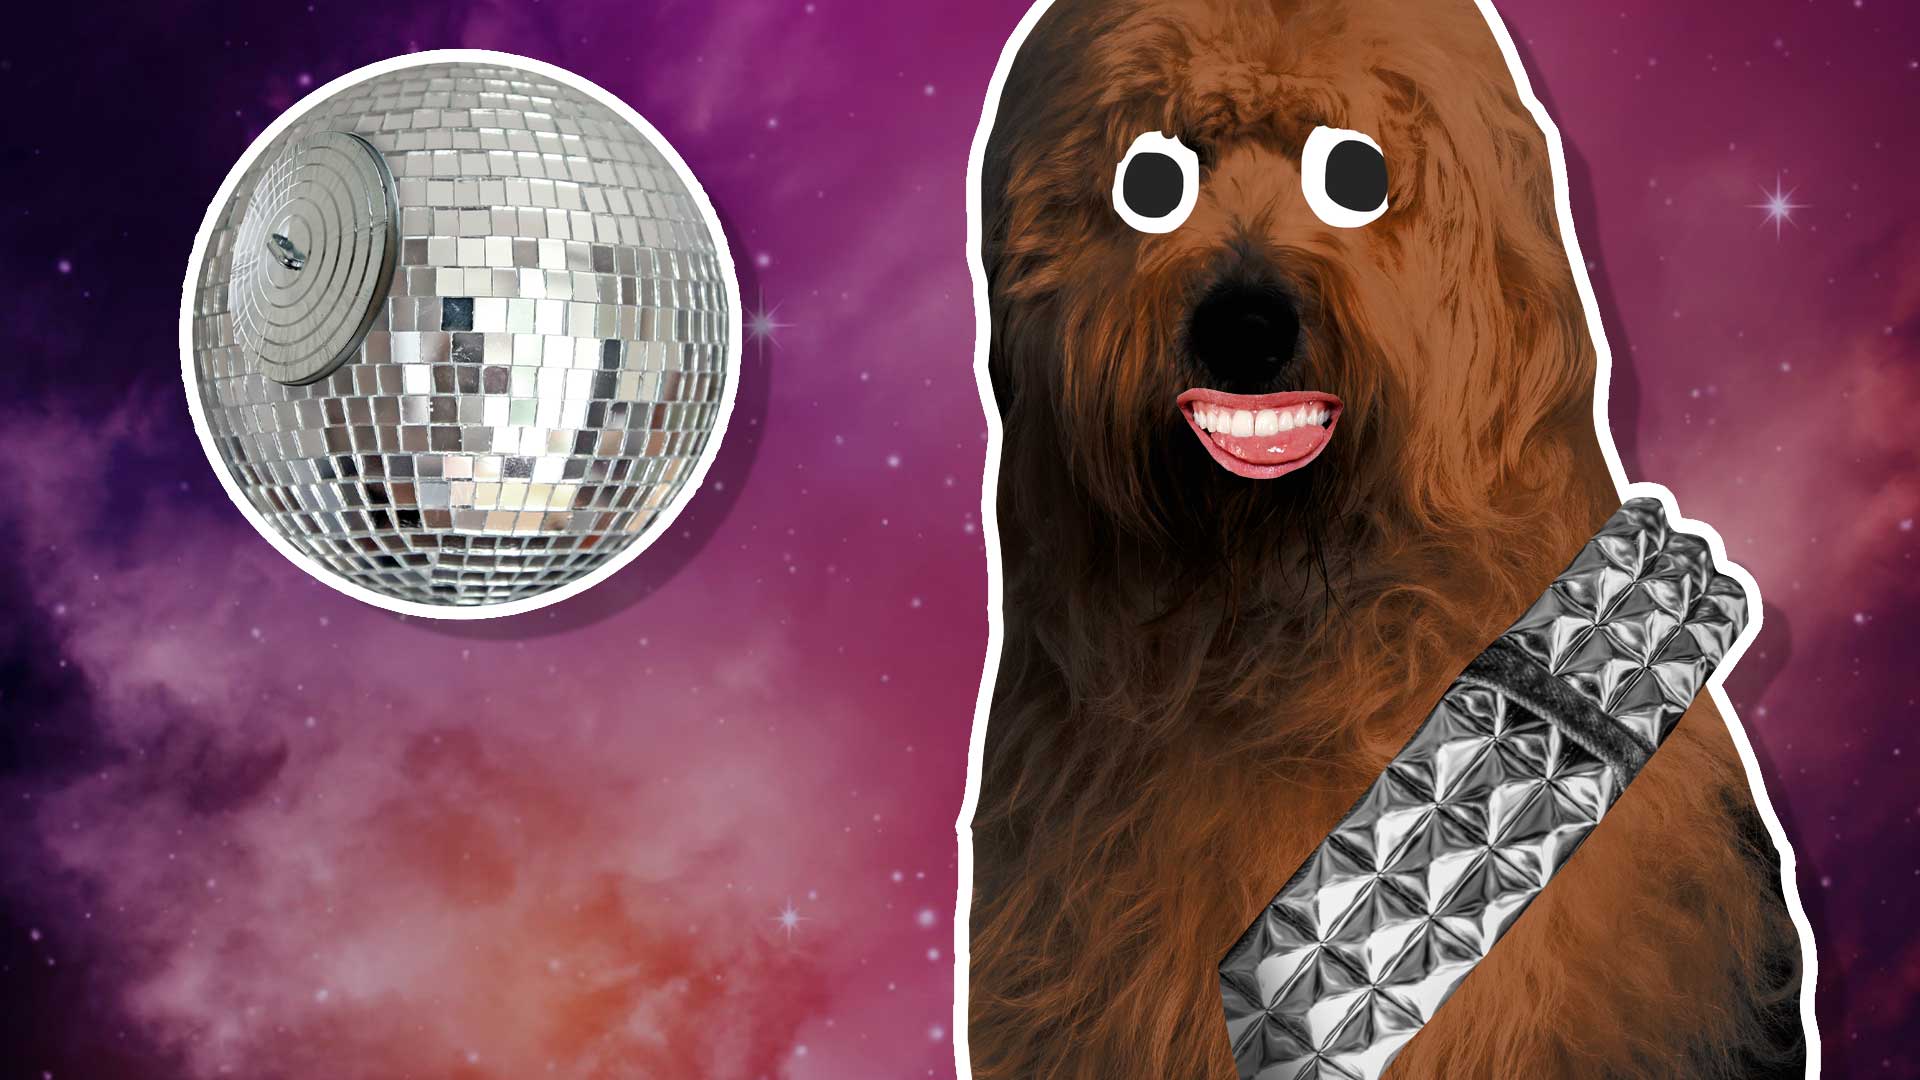 A Wookiee lookalike and a mirror ball which looks like the Death Star